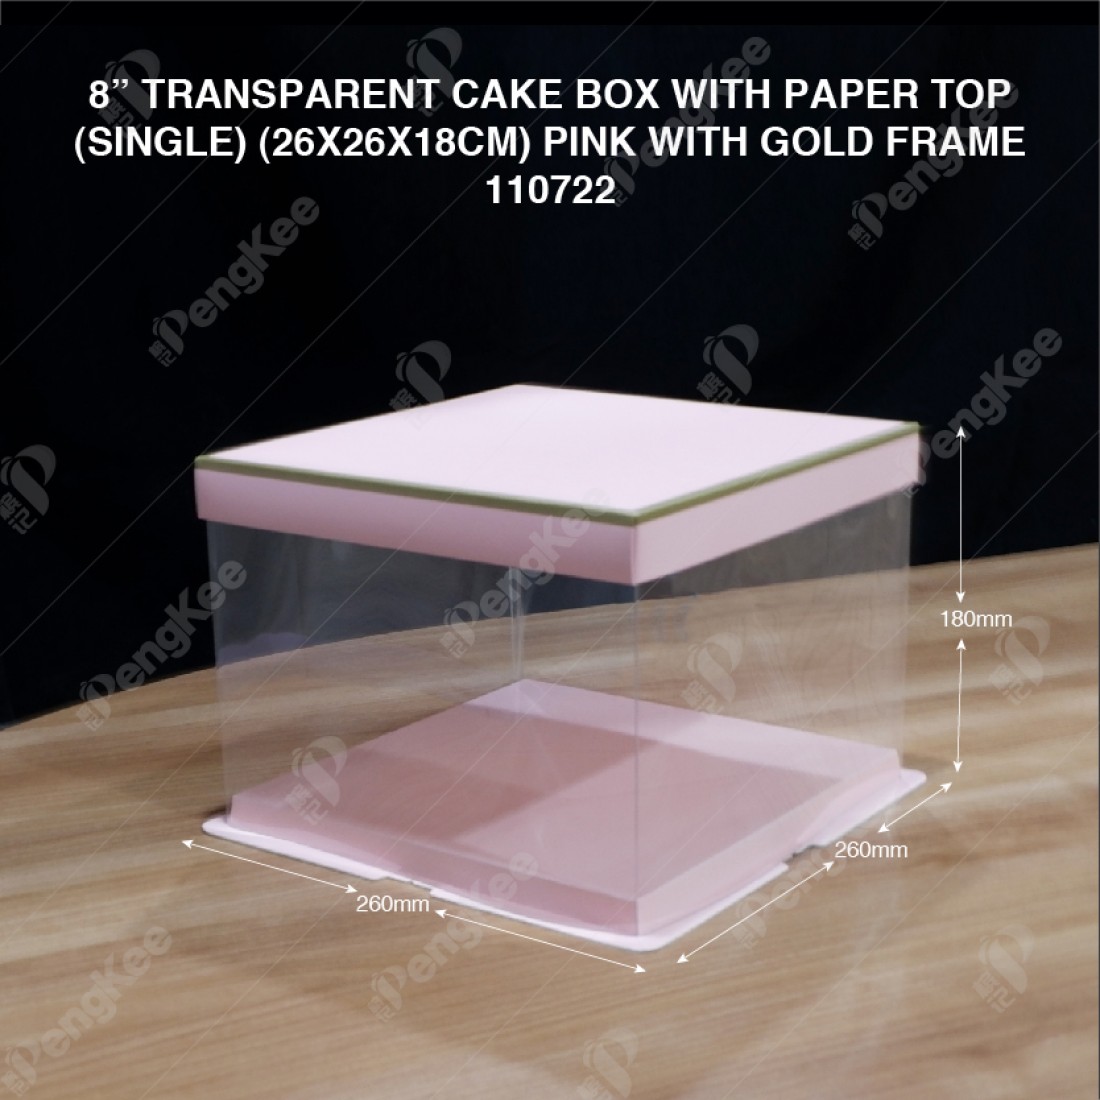 8" TRANSPARENT CAKE BOX WITH PAPER TOP(SINGLE) (26*26*18CM)- PINK WITH GOLD FRAME